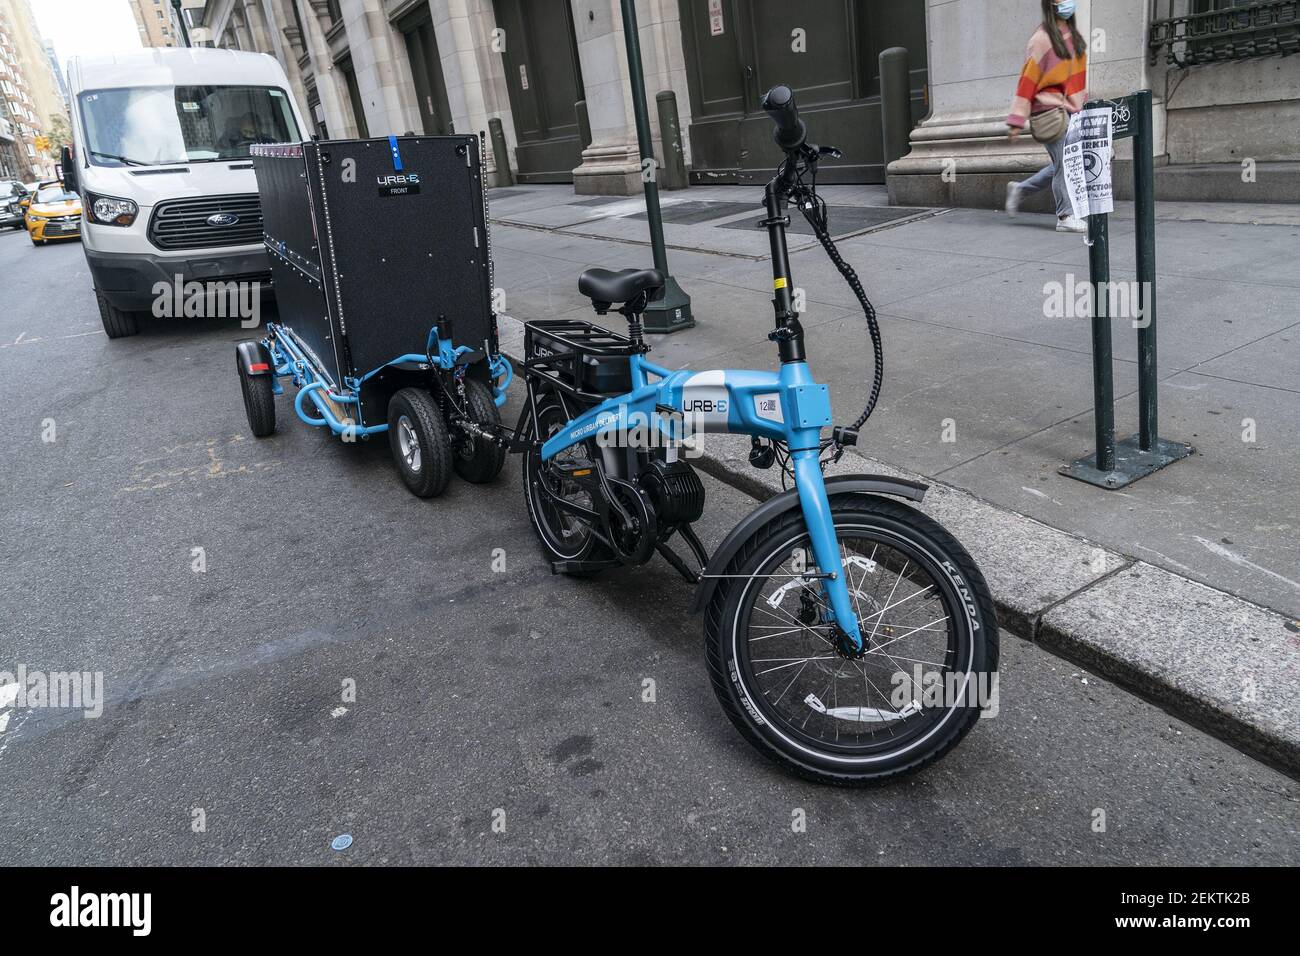 View of Urb-E bike and trailer to be used by Amazon employees for delivery  in New York. In order to make delivery more efficient and reduce greenhouse  gas emissions by cars Amazon